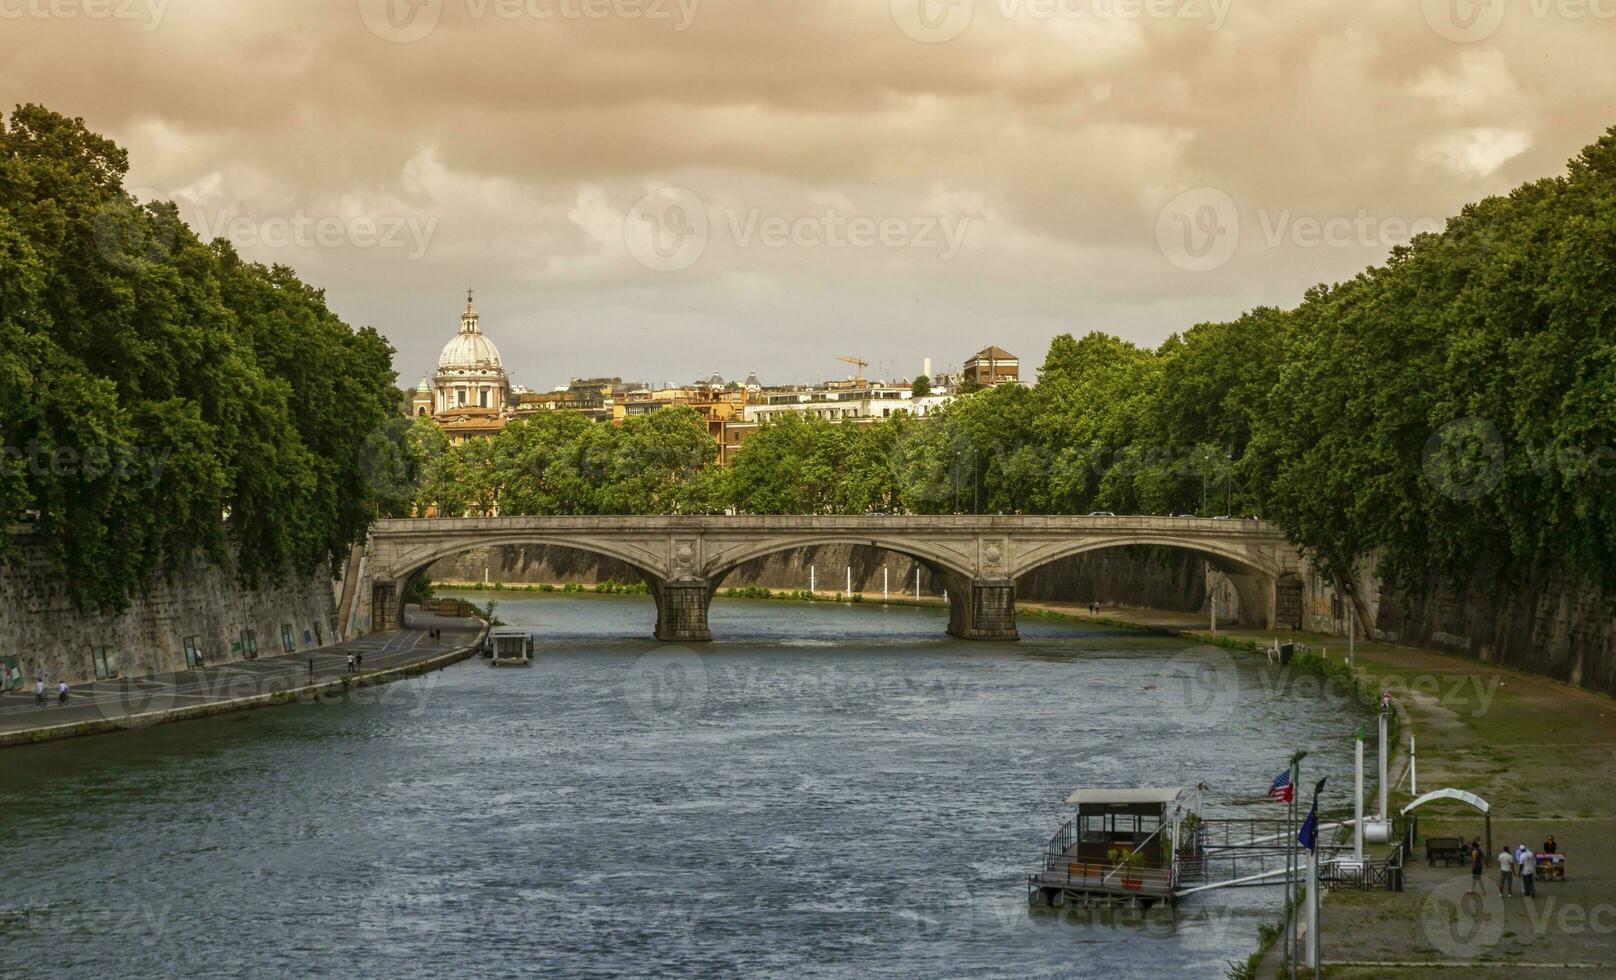 Bridge on the river Tiber and dome of St. Peter's Basilica in Rome, Italy photo